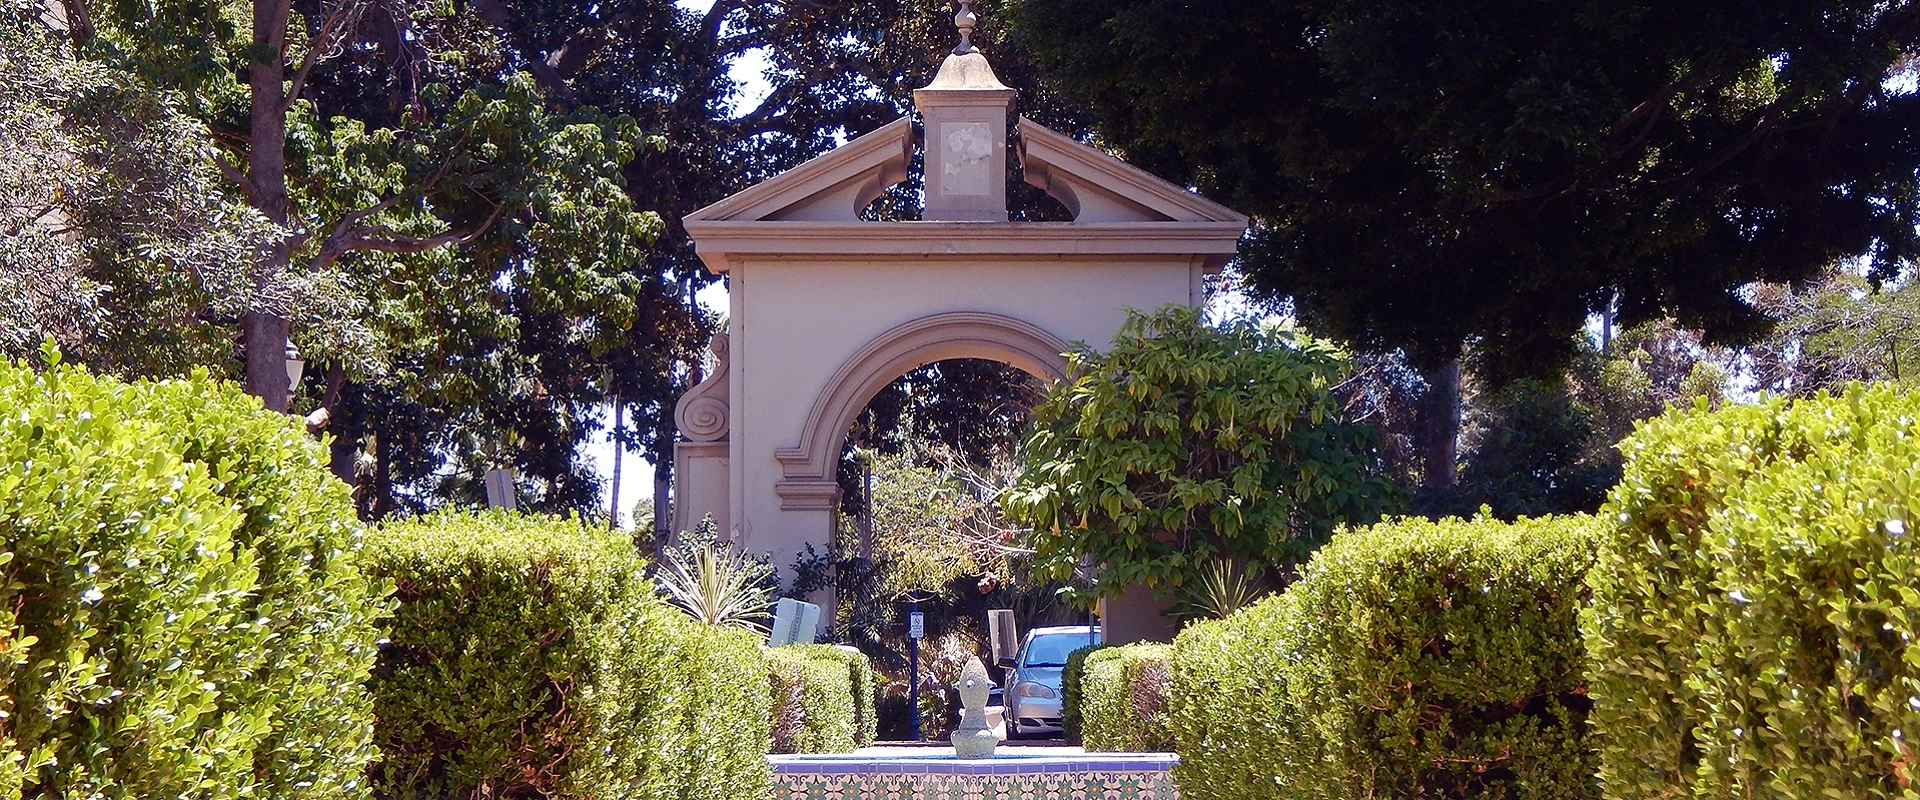 A row of trimmed bushes with a fountain in the center, and an arched entry way into the Alcazar garden in the background.